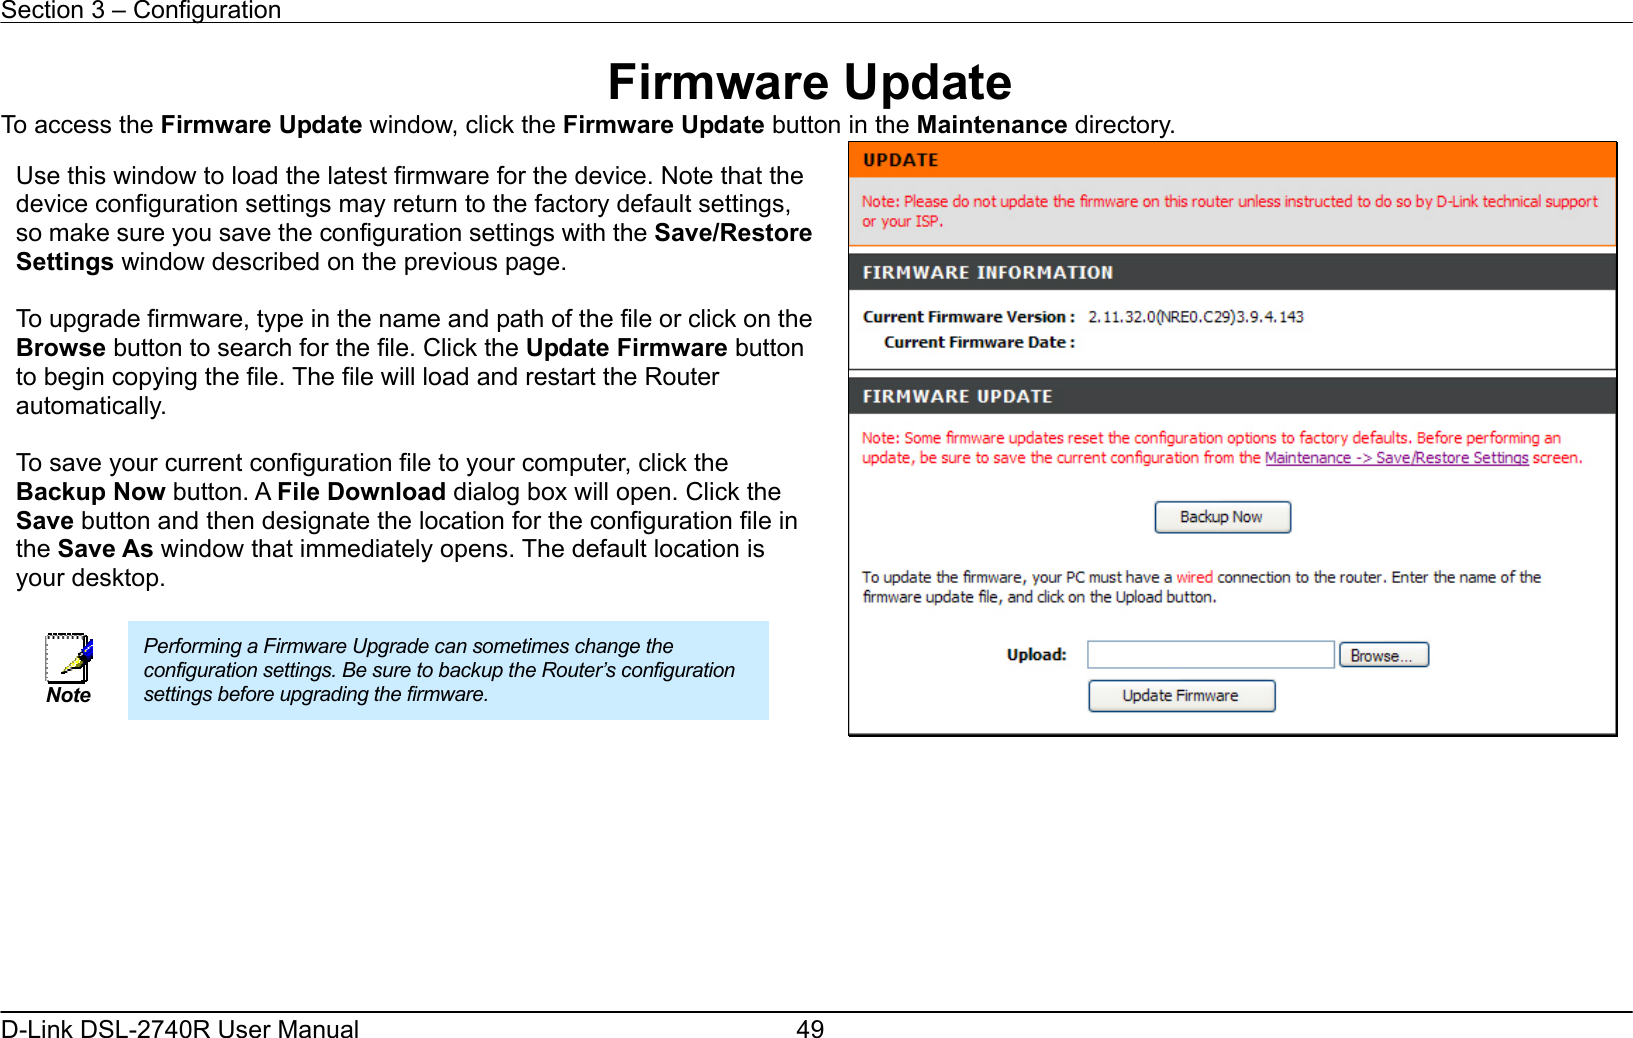 Section 3 – Configuration   D-Link DSL-2740R User Manual  49Firmware Update To access the Firmware Update window, click the Firmware Update button in the Maintenance directory.          Use this window to load the latest firmware for the device. Note that the device configuration settings may return to the factory default settings, so make sure you save the configuration settings with the Save/Restore Settings window described on the previous page.  To upgrade firmware, type in the name and path of the file or click on the Browse button to search for the file. Click the Update Firmware button to begin copying the file. The file will load and restart the Router automatically.  To save your current configuration file to your computer, click the Backup Now button. A File Download dialog box will open. Click the Save button and then designate the location for the configuration file in the Save As window that immediately opens. The default location is your desktop.       Note Performing a Firmware Upgrade can sometimes change the configuration settings. Be sure to backup the Router’s configuration settings before upgrading the firmware.  